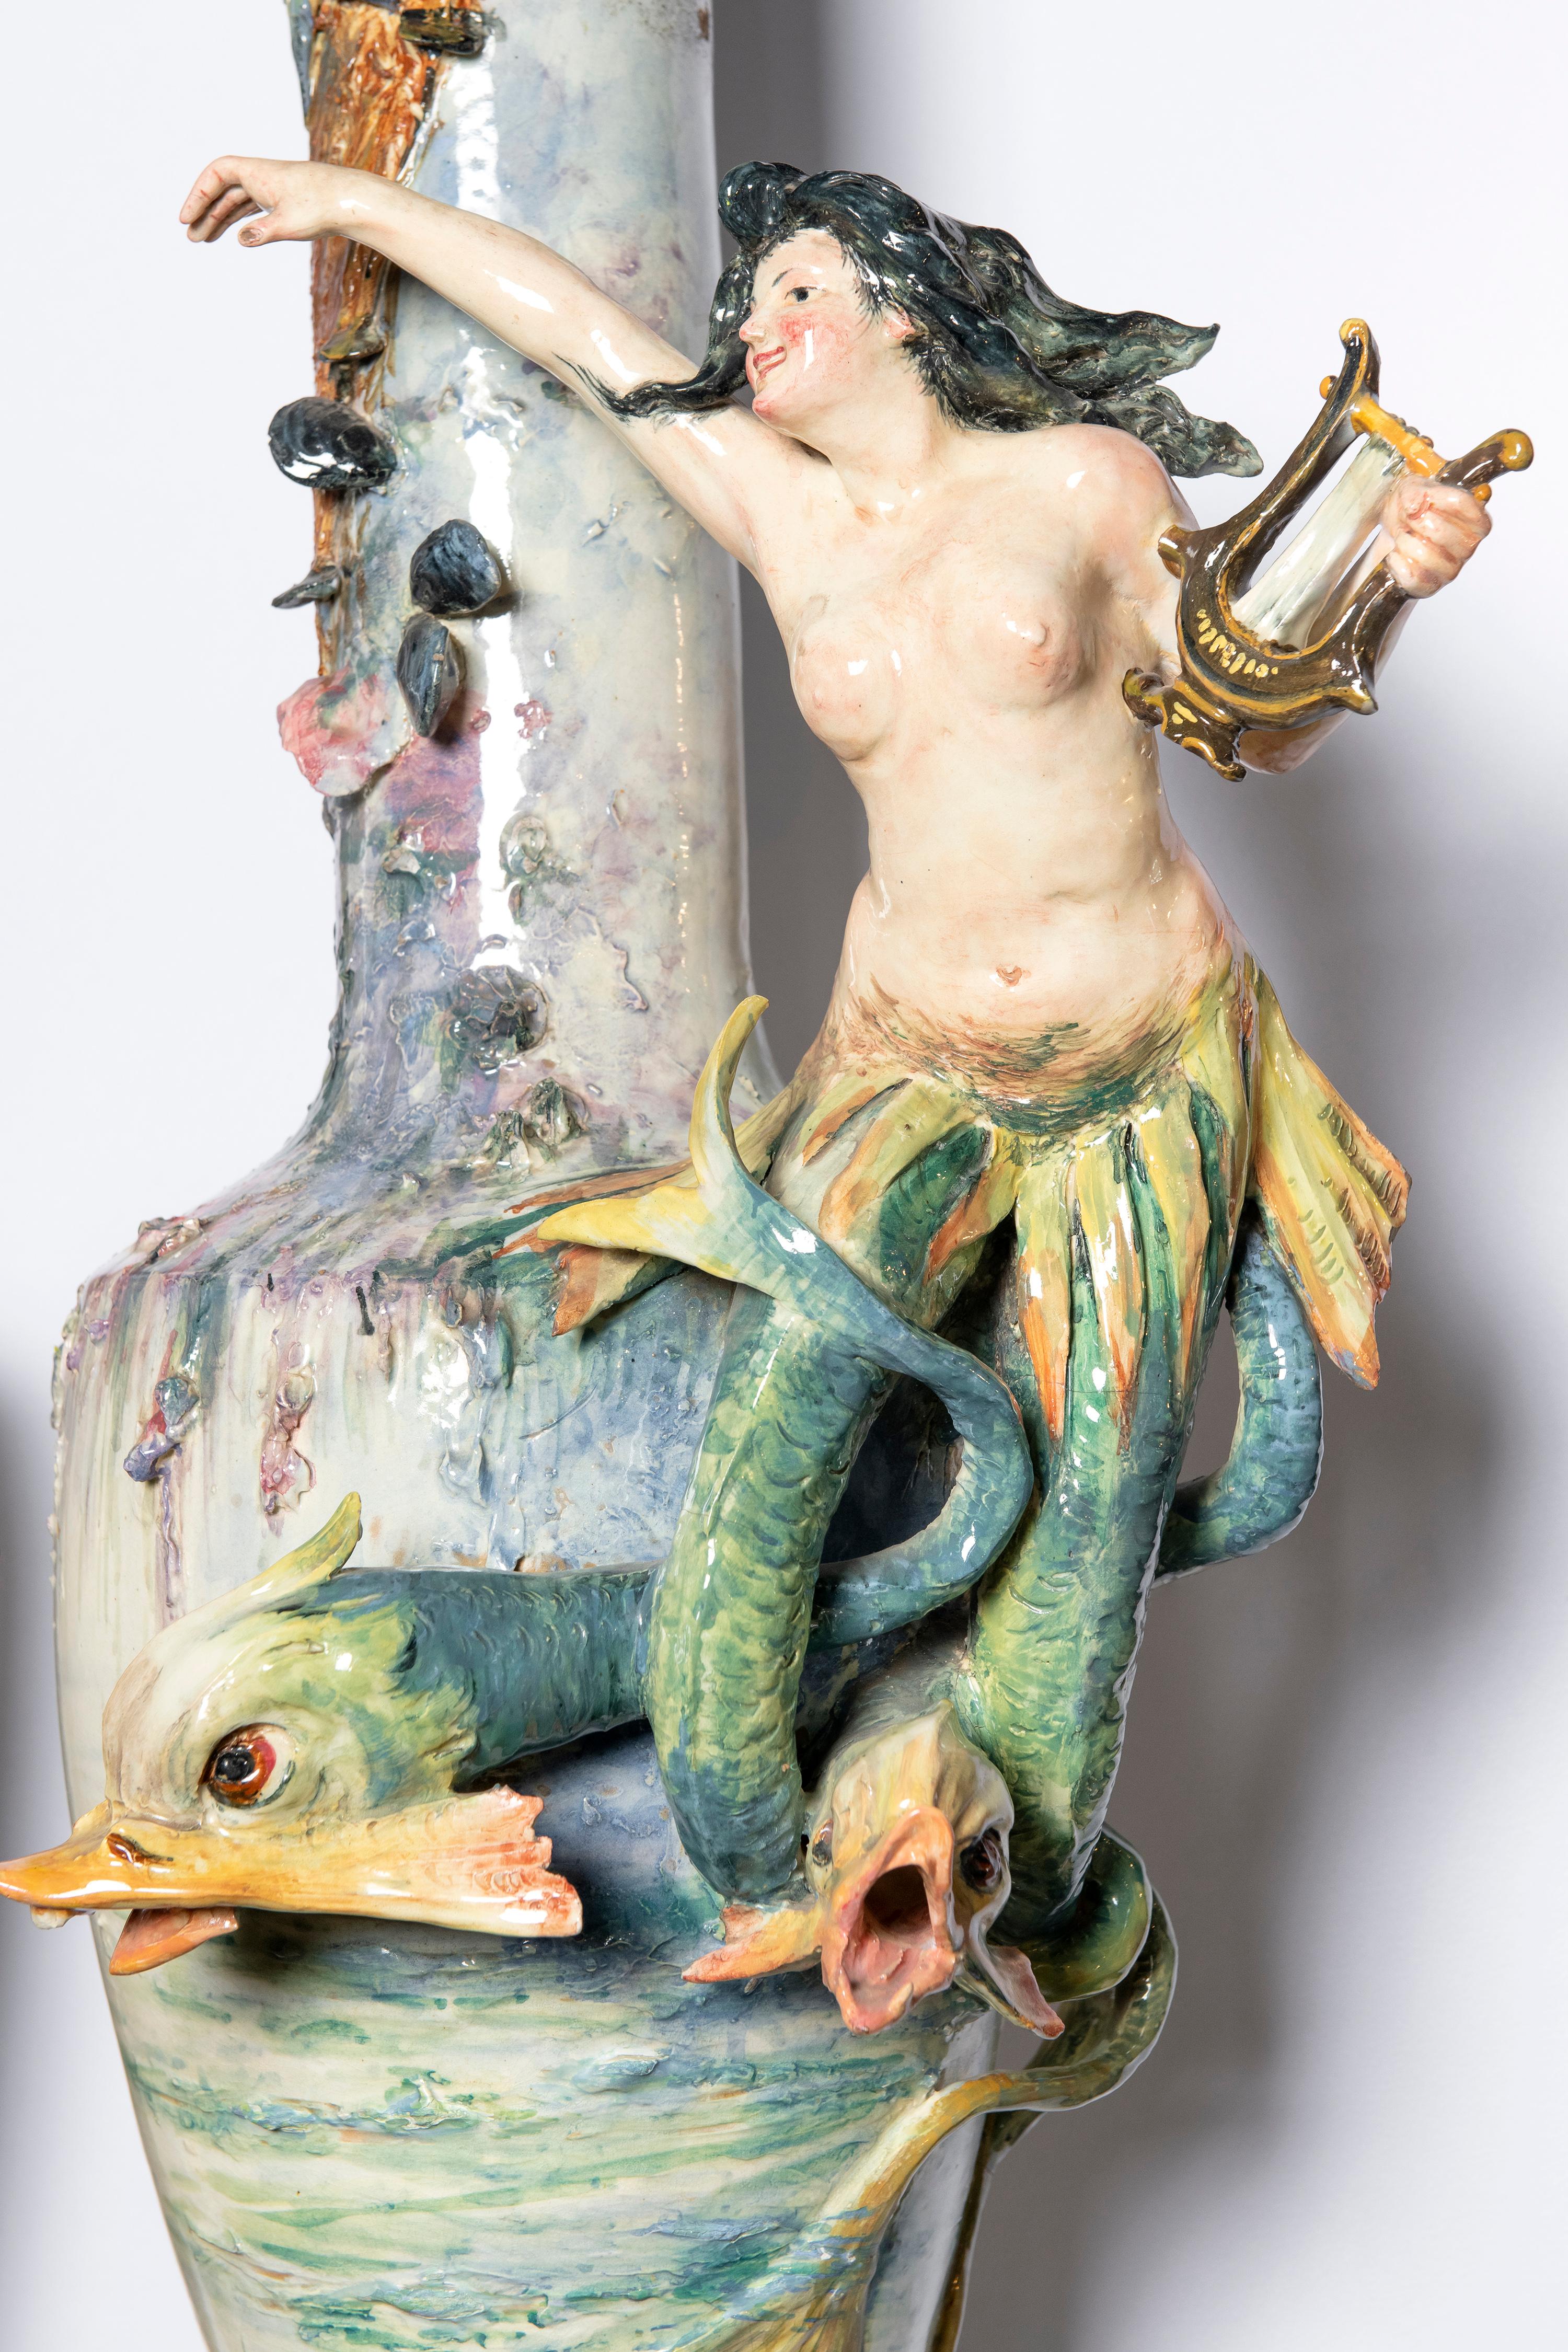 Pair of glazed ceramic vases with wood base, France, late 19th century.
With mythology figures, Psyche with angels and Siren.
Measures: Ceramic vase height 100 cm.
Wood base height 53 cm.
Total piece height 153 cm.